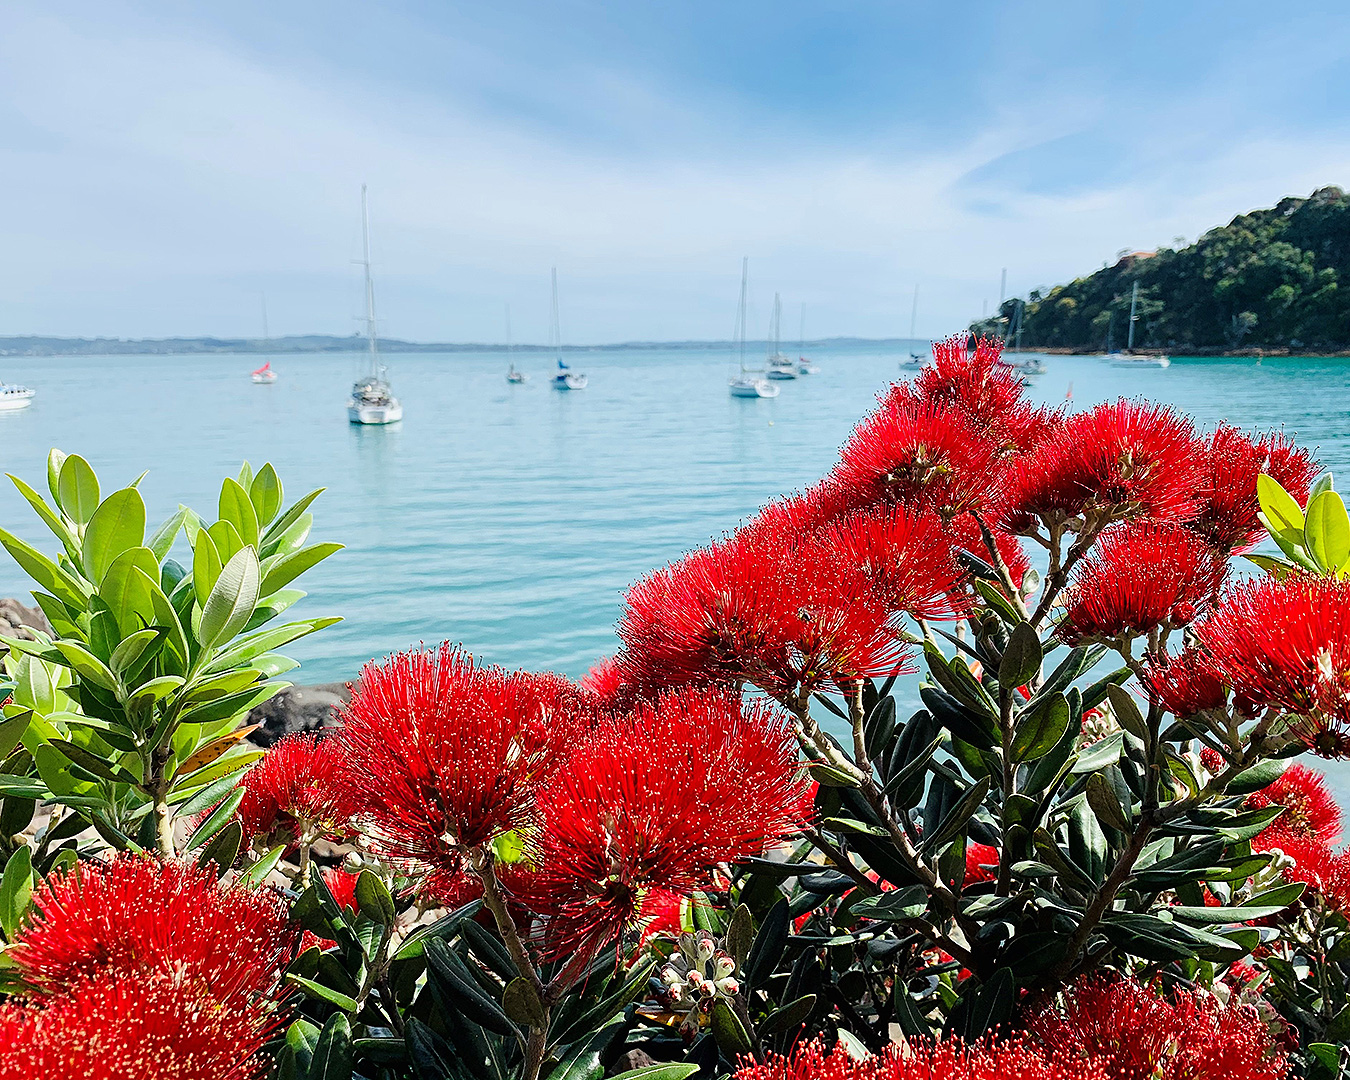 A general view of Waiheke Island shows red flowers in full bloom.